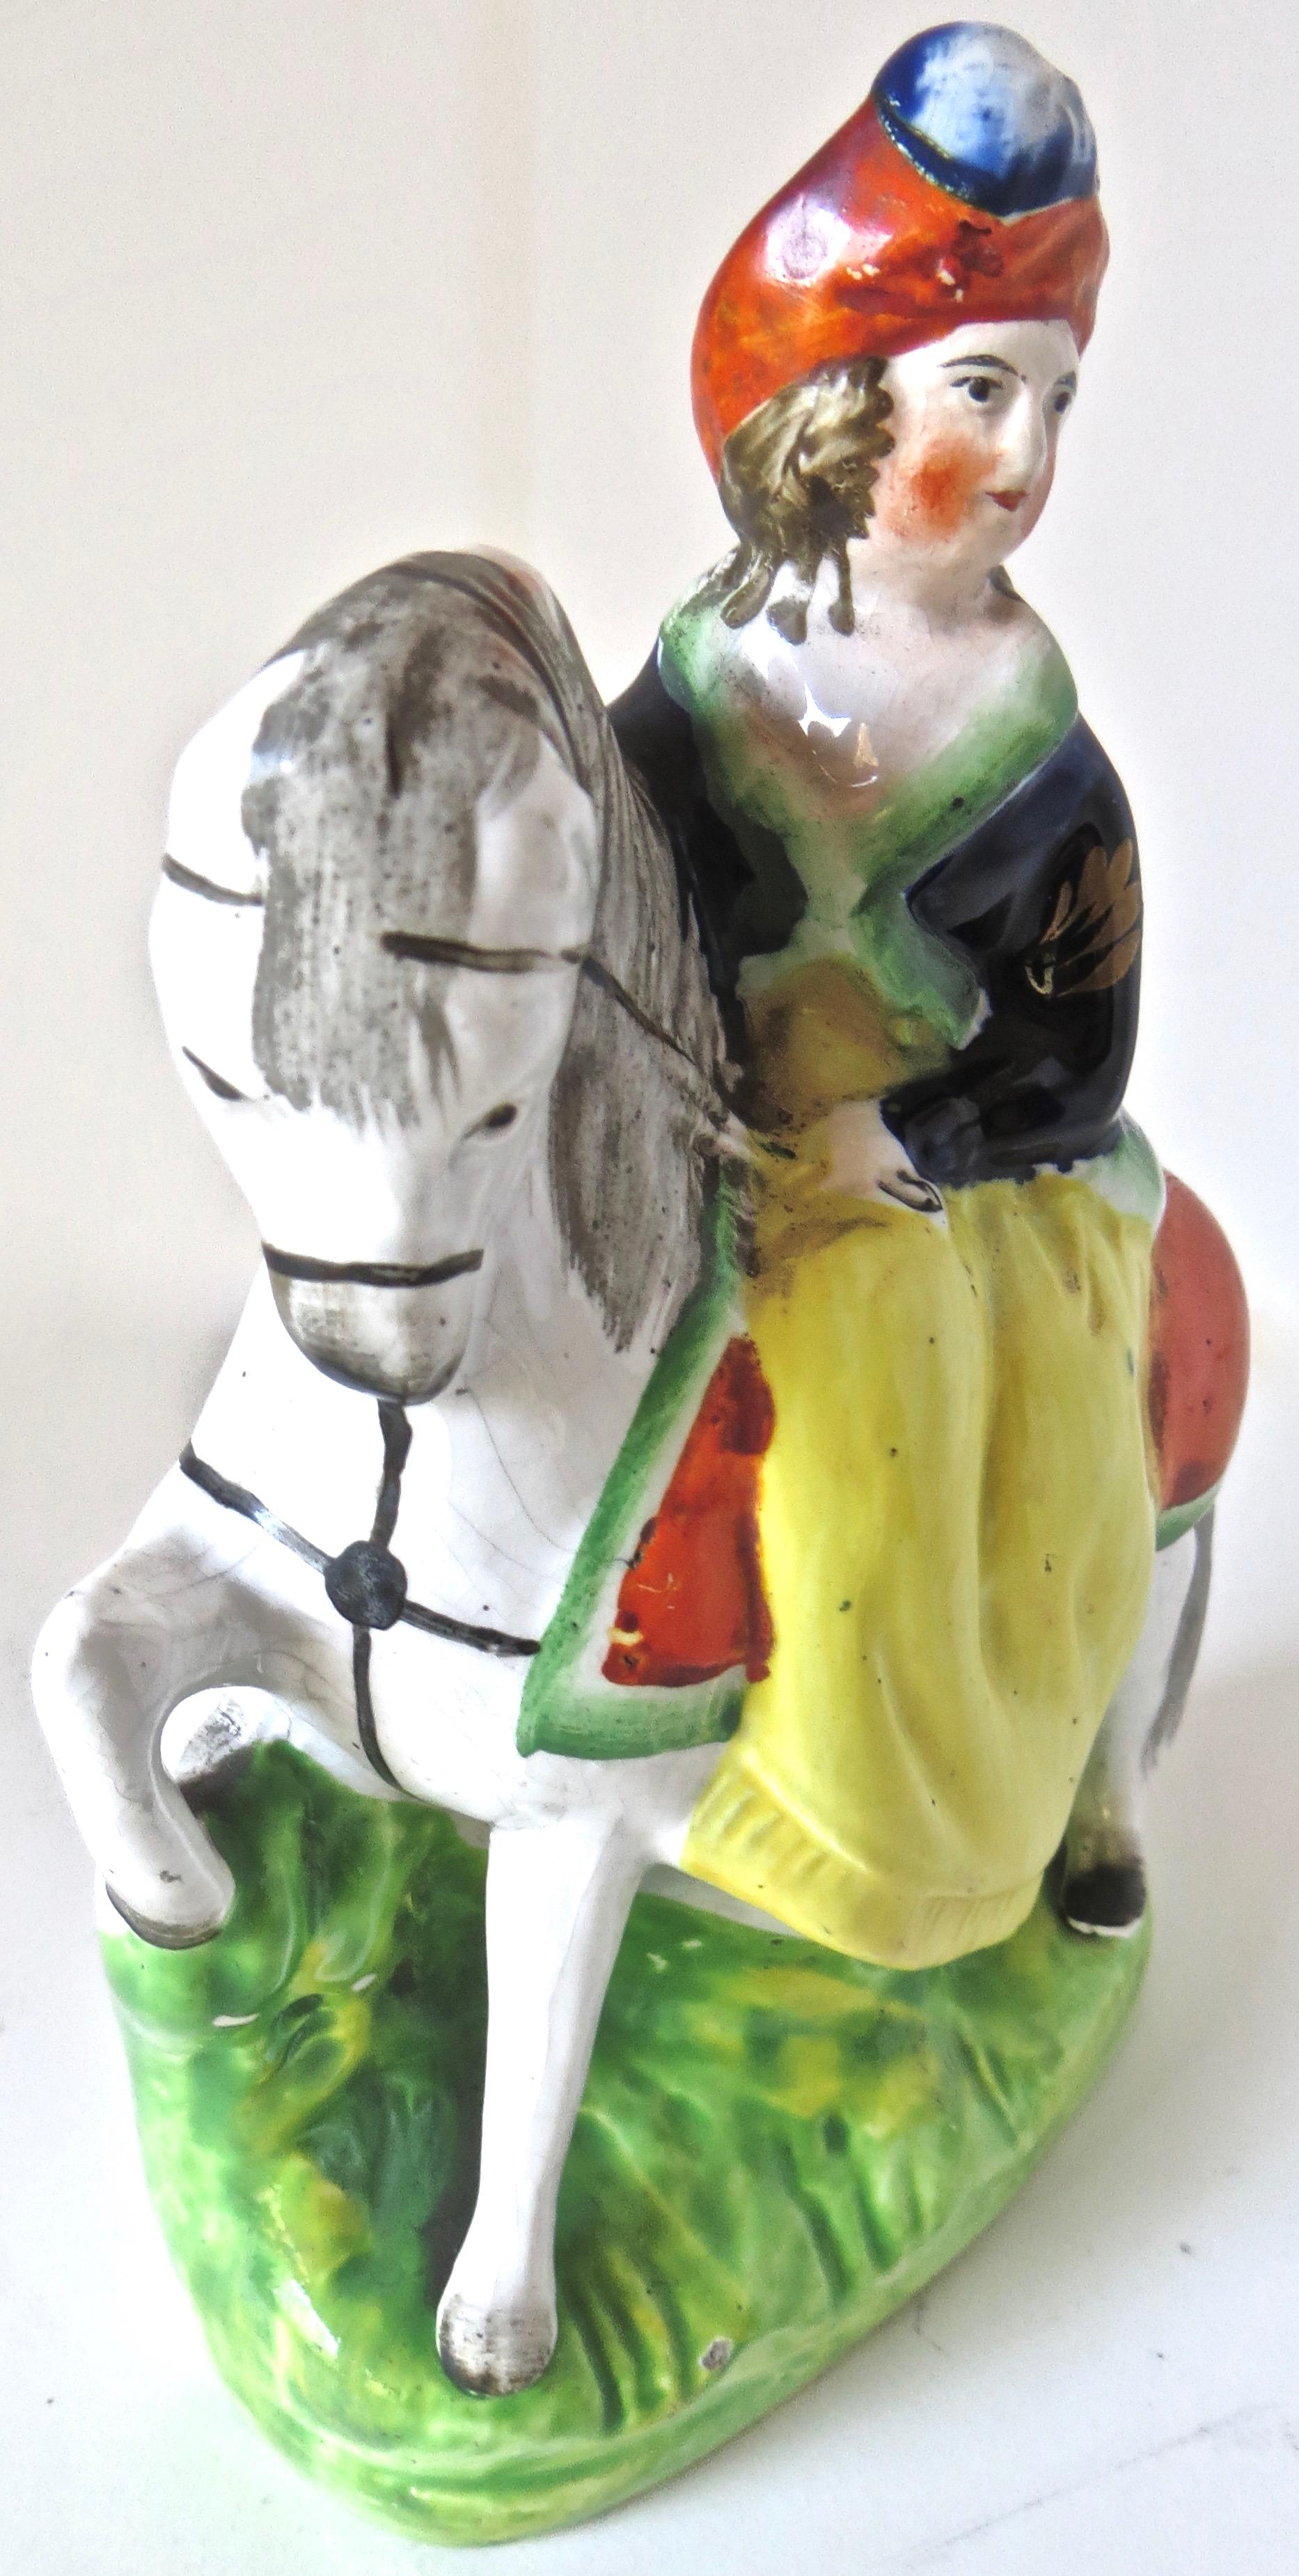 Late 19th century Staffordshire porcelain figurine depicts a young well-dressed lady riding a handsome white horse 